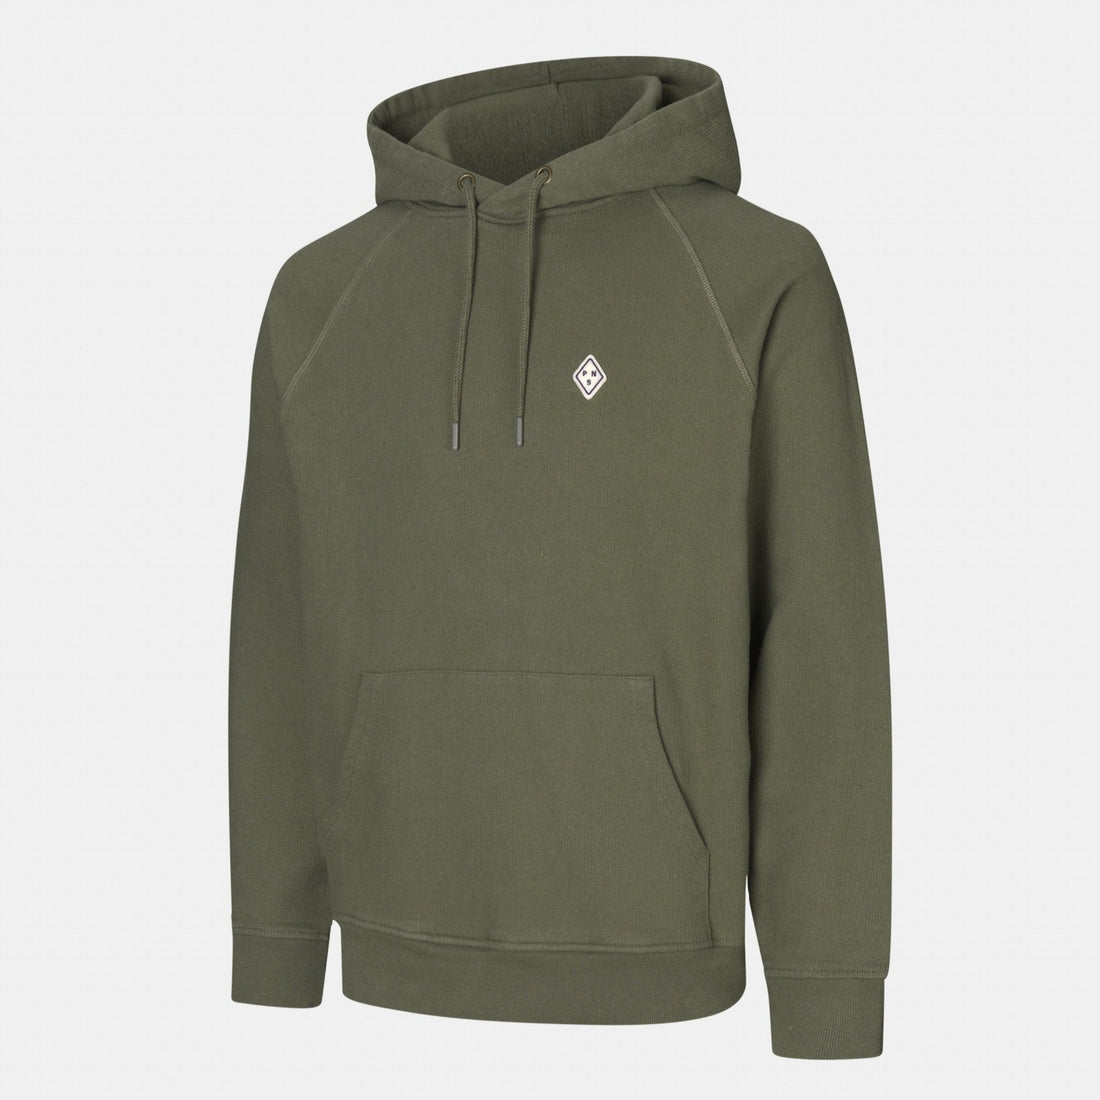 Pas Normal Studios - Off Race Patch Hoodie - Dusty Olive